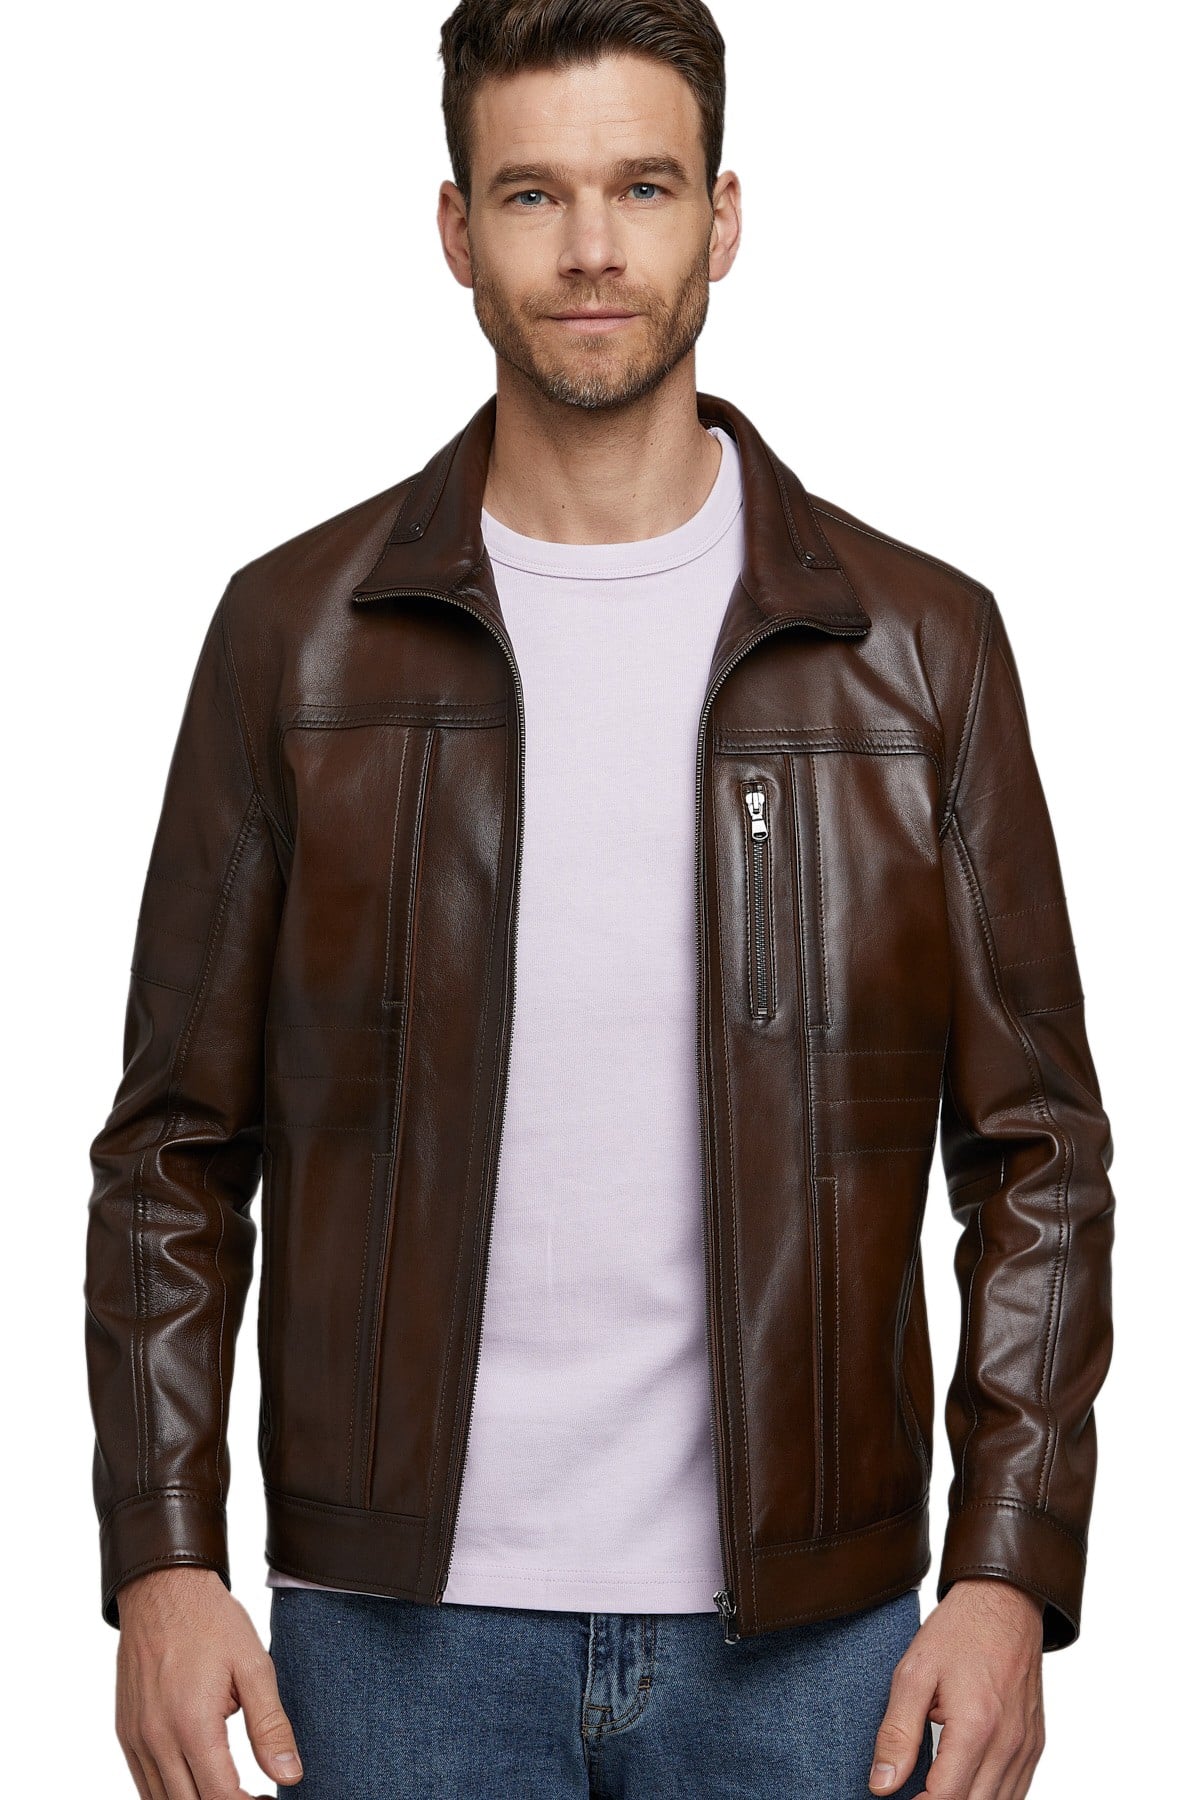 Looking For Brown Mens Fashion Leather Jacket? All Sizes Here